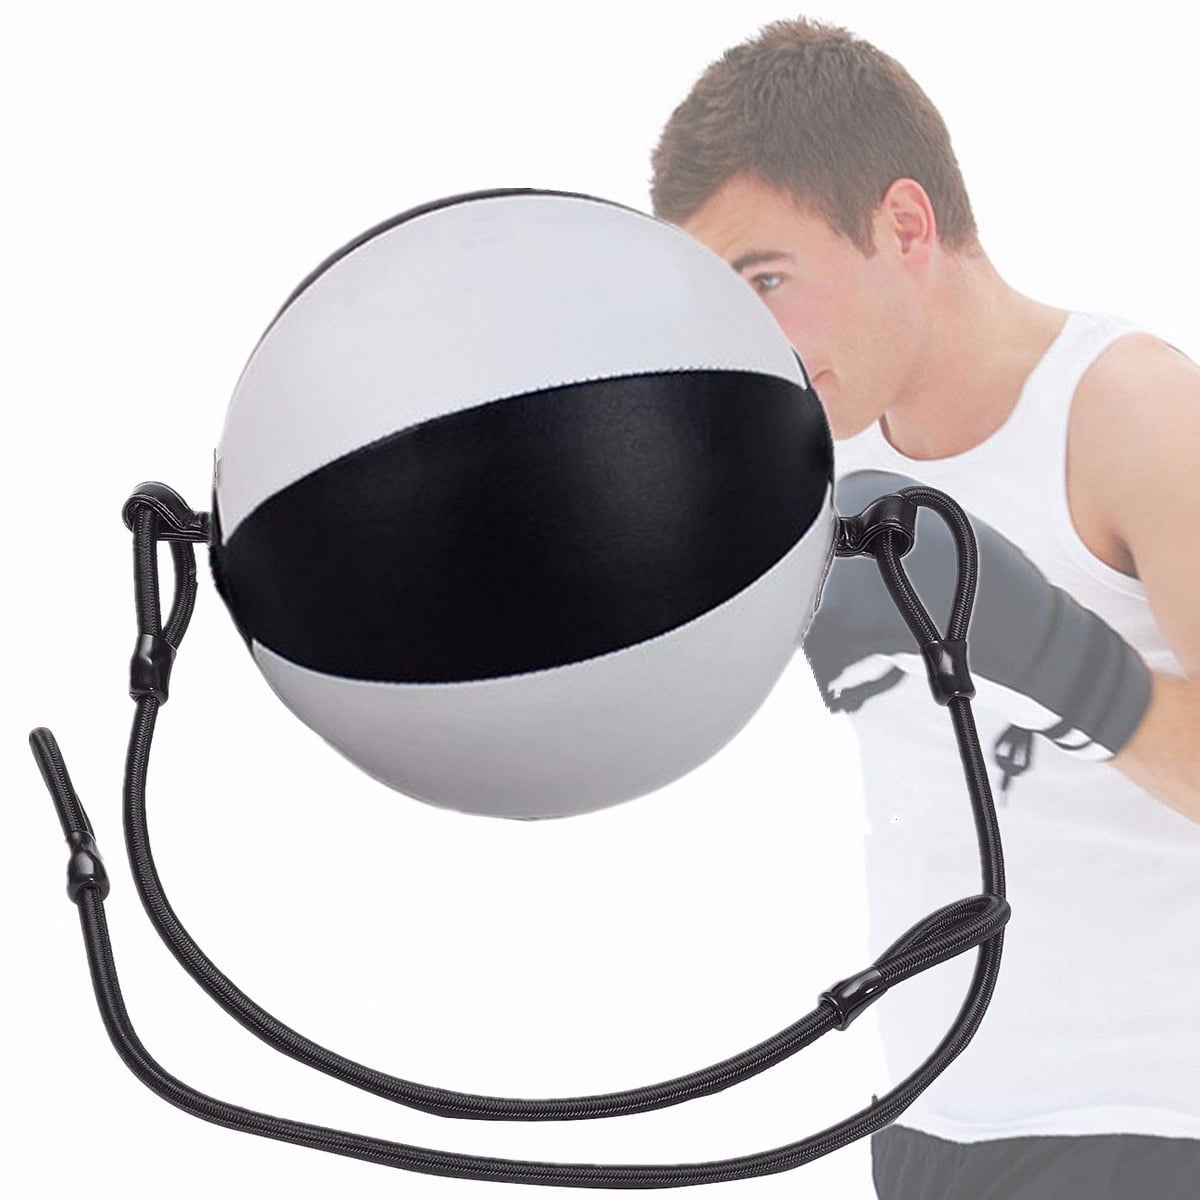 Details about   Hanging Boxing Speed Bag Punching Ball for Gym MMA Training Boxing Home 